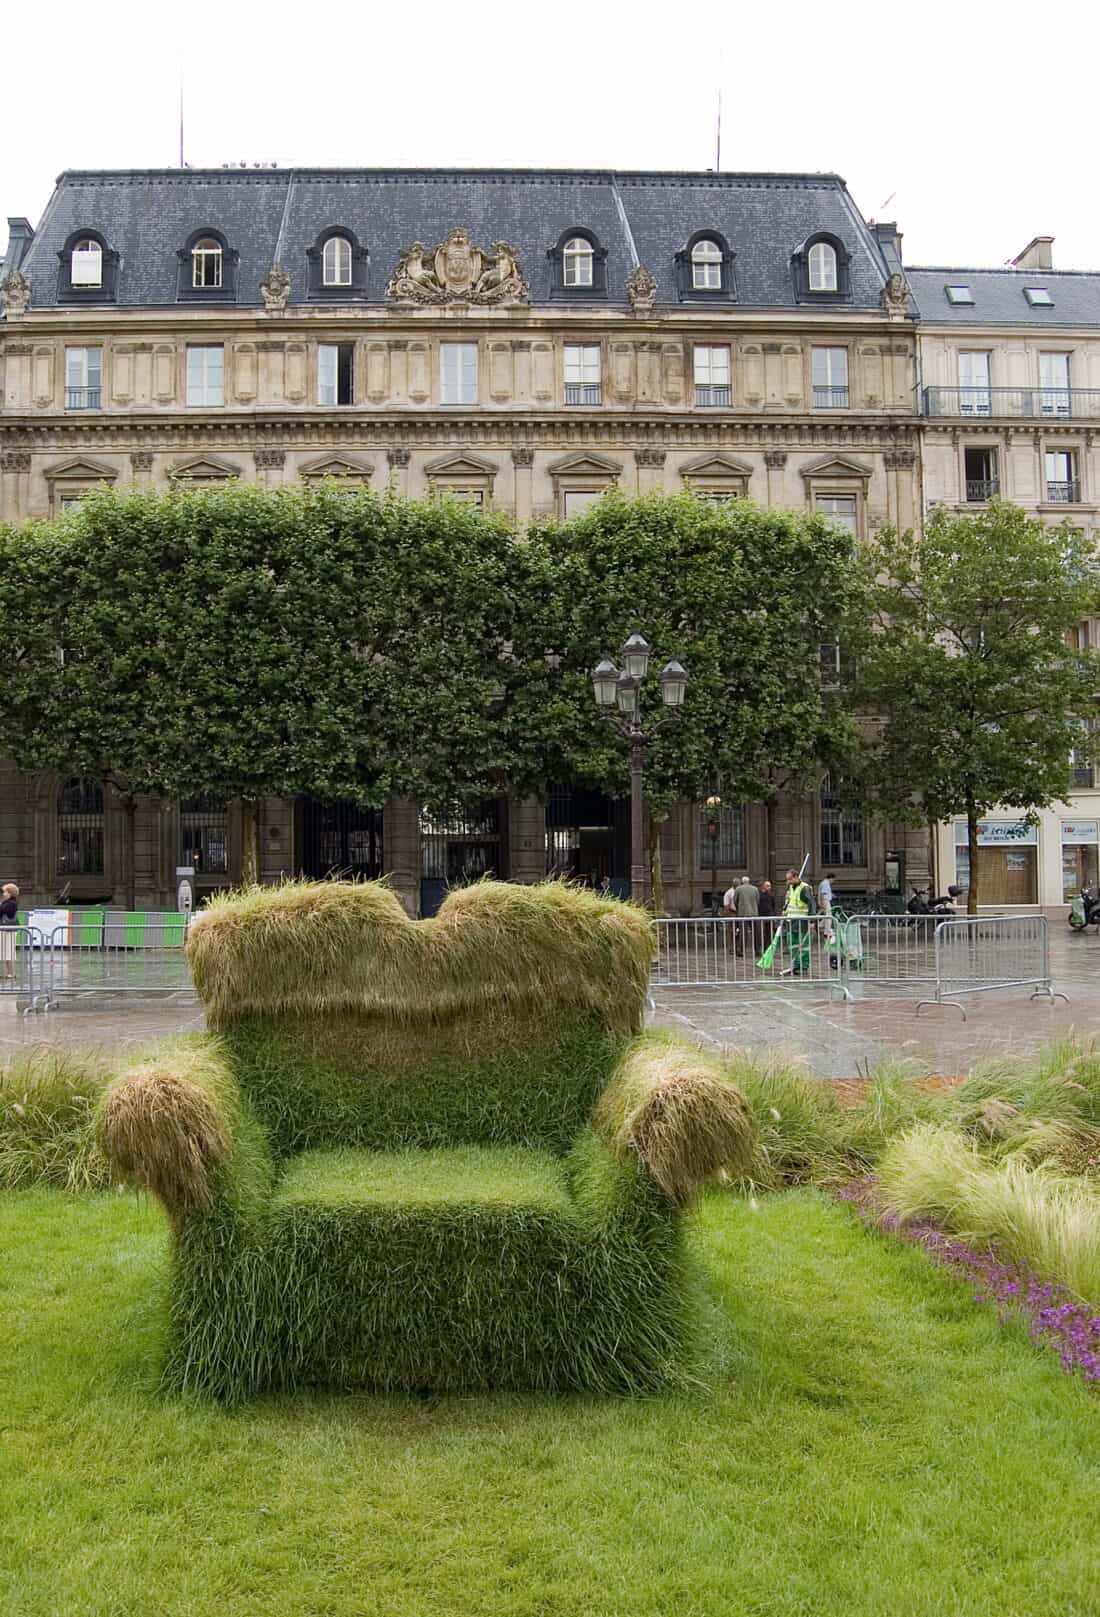 A chair made of grass in front of a building.